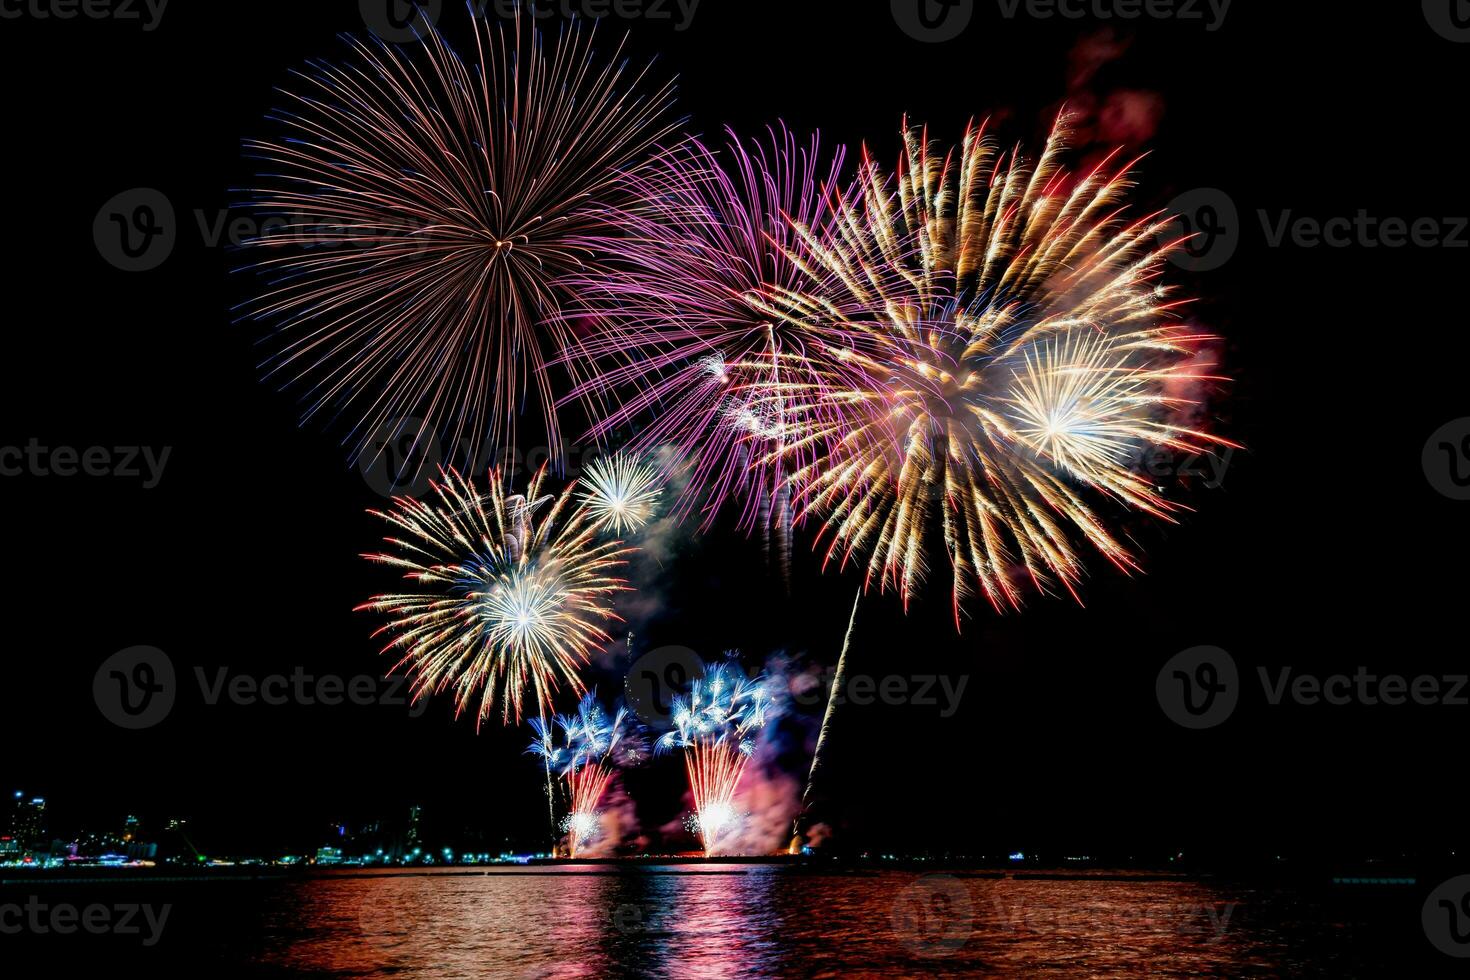 Amazing beautiful colorful fireworks display on celebration night, showing on the sea beach with multi color of reflection on water photo